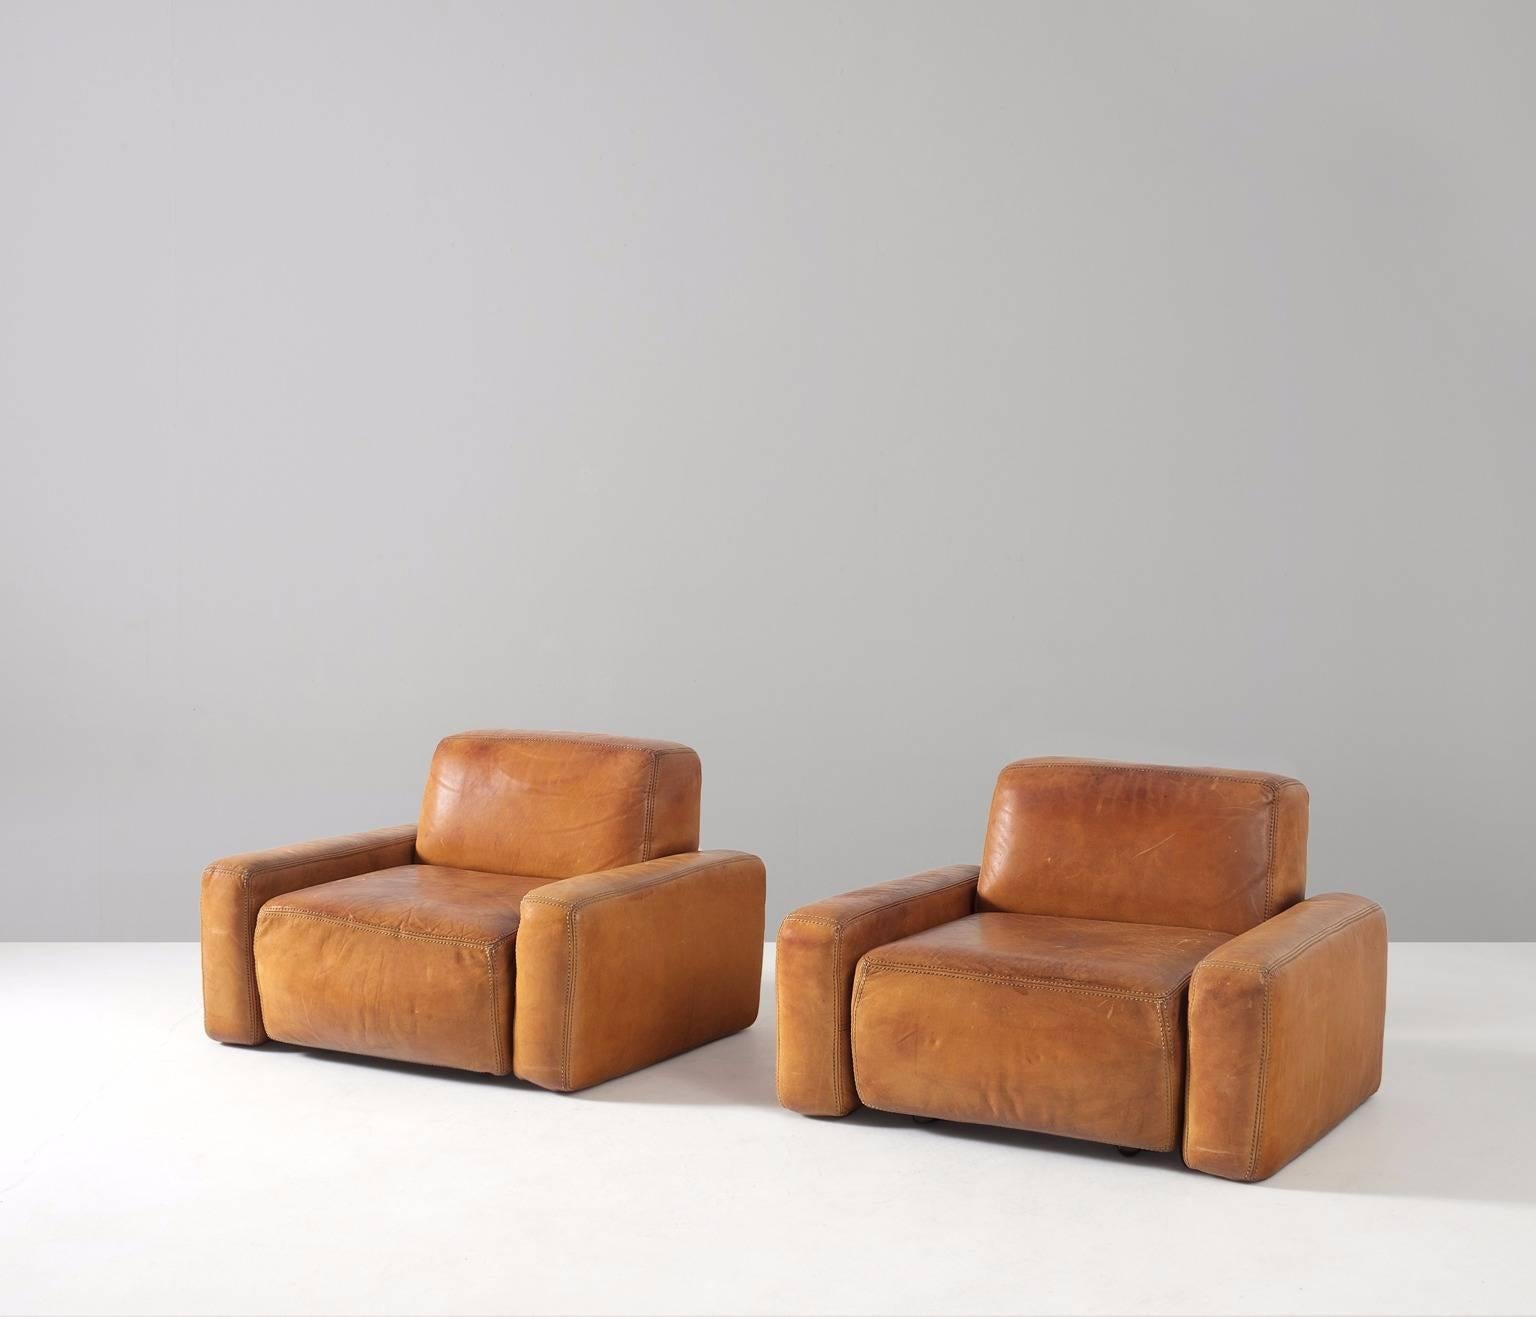 Pair of lounge chairs, in cognac leather, for Durlet furniture, Belgium, 1970s.  

Two wide cognac leather lounge chairs with a cubic and sturdy design. The patina on the natural leather is stunning. Different shades of brown create a beautiful